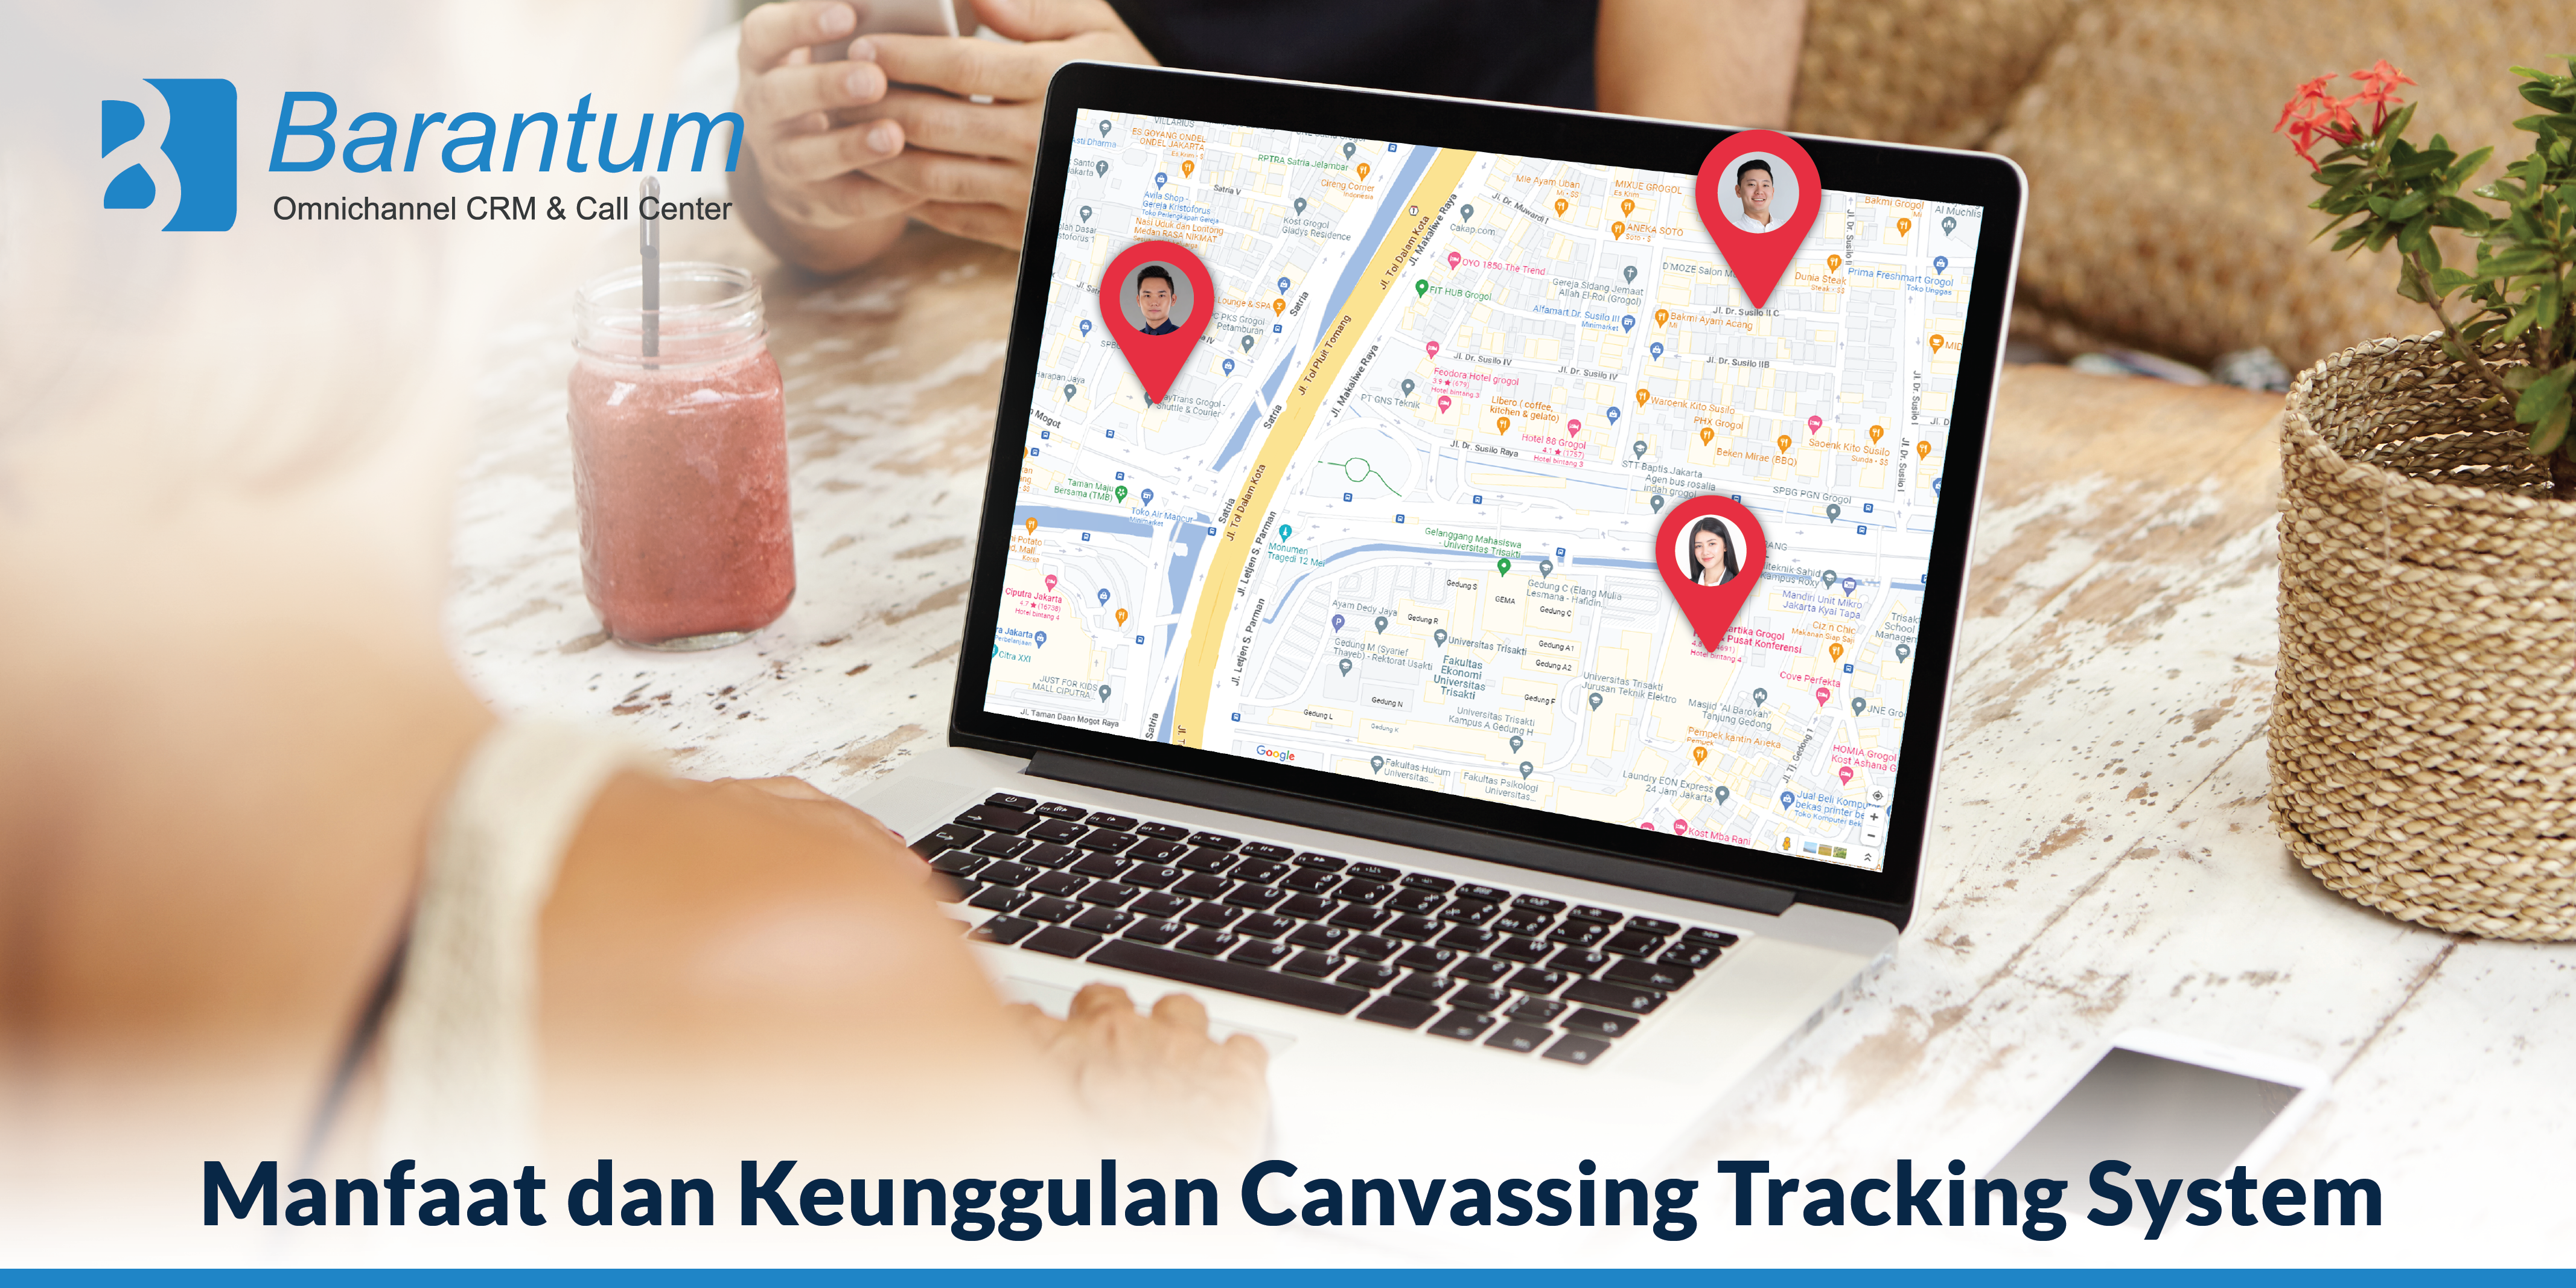 canvassing tracking system